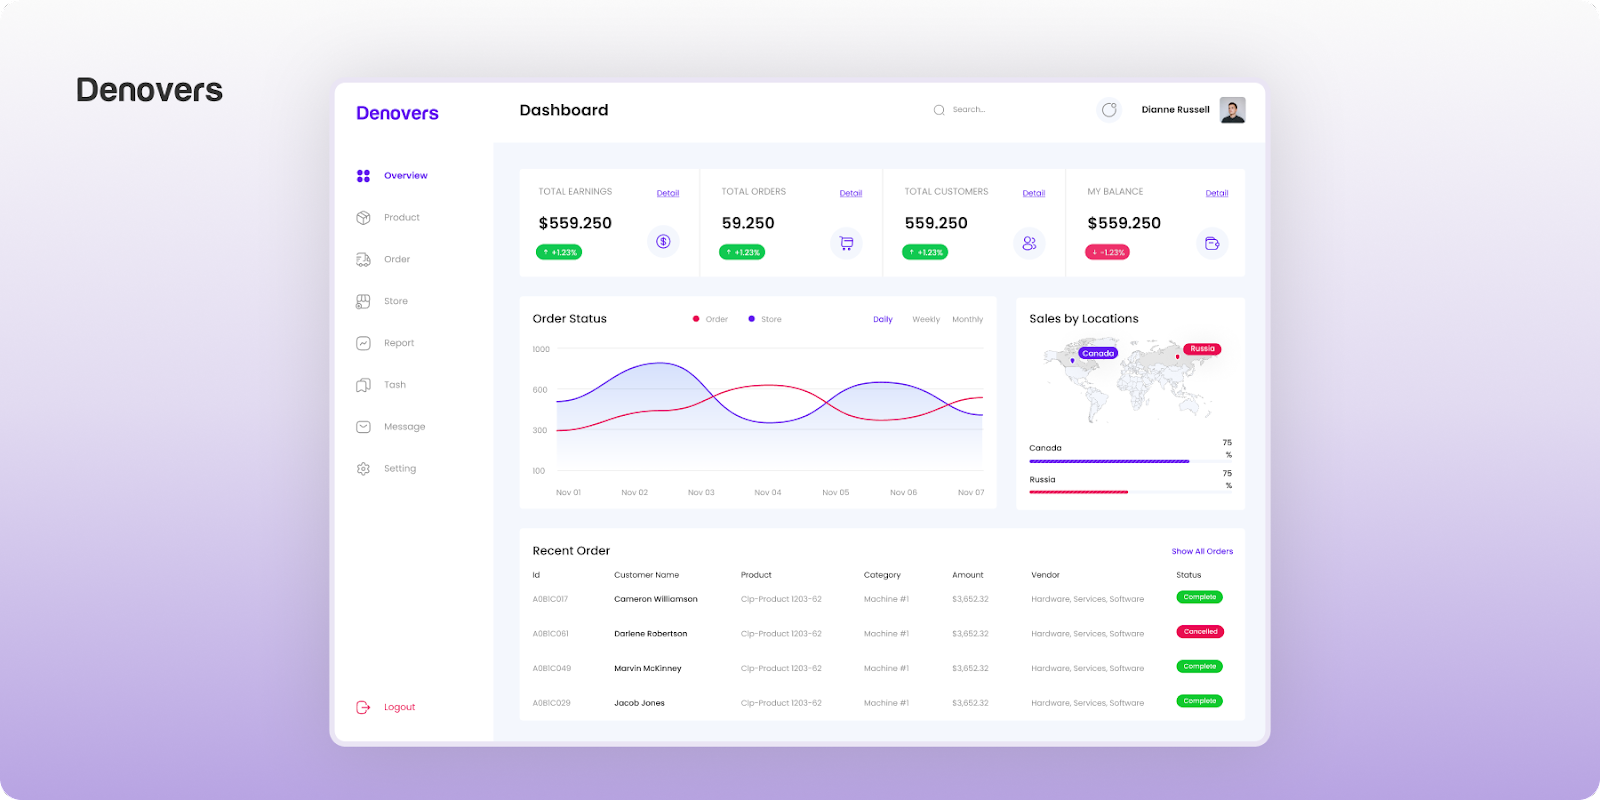 A strategic type of dashboard design example 